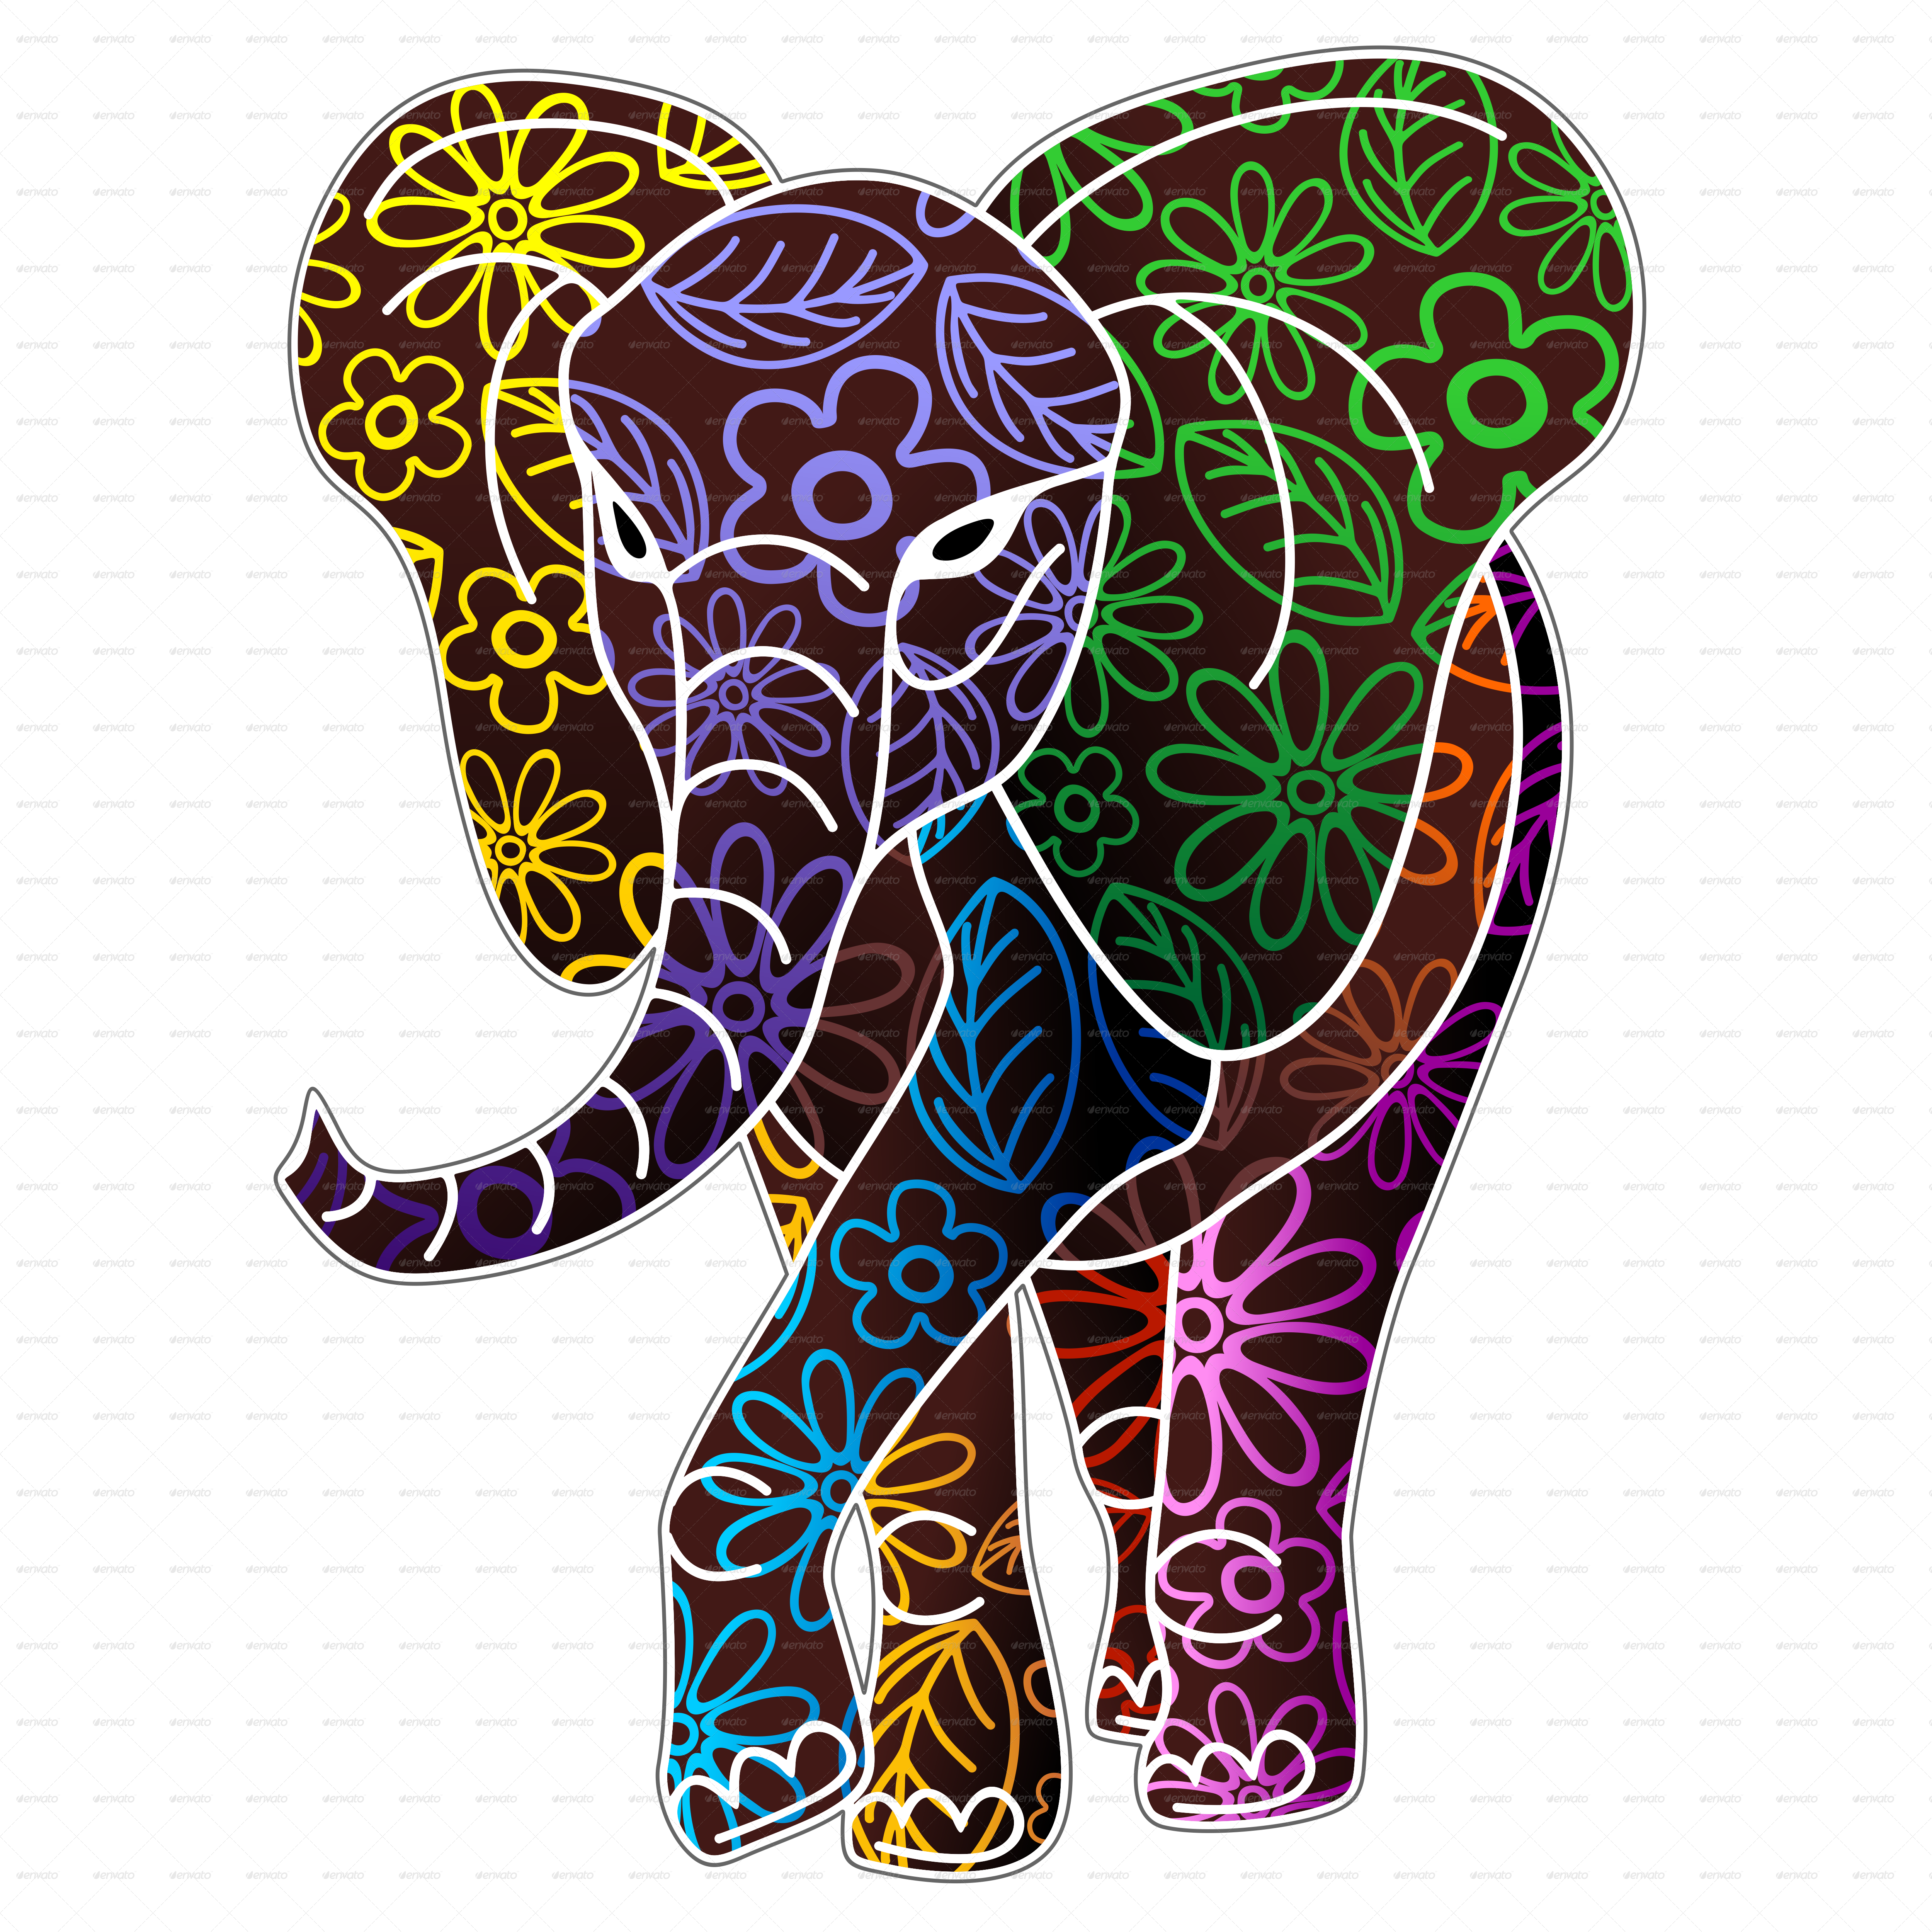 A Colorful Elephant With Flowers Drawn On It